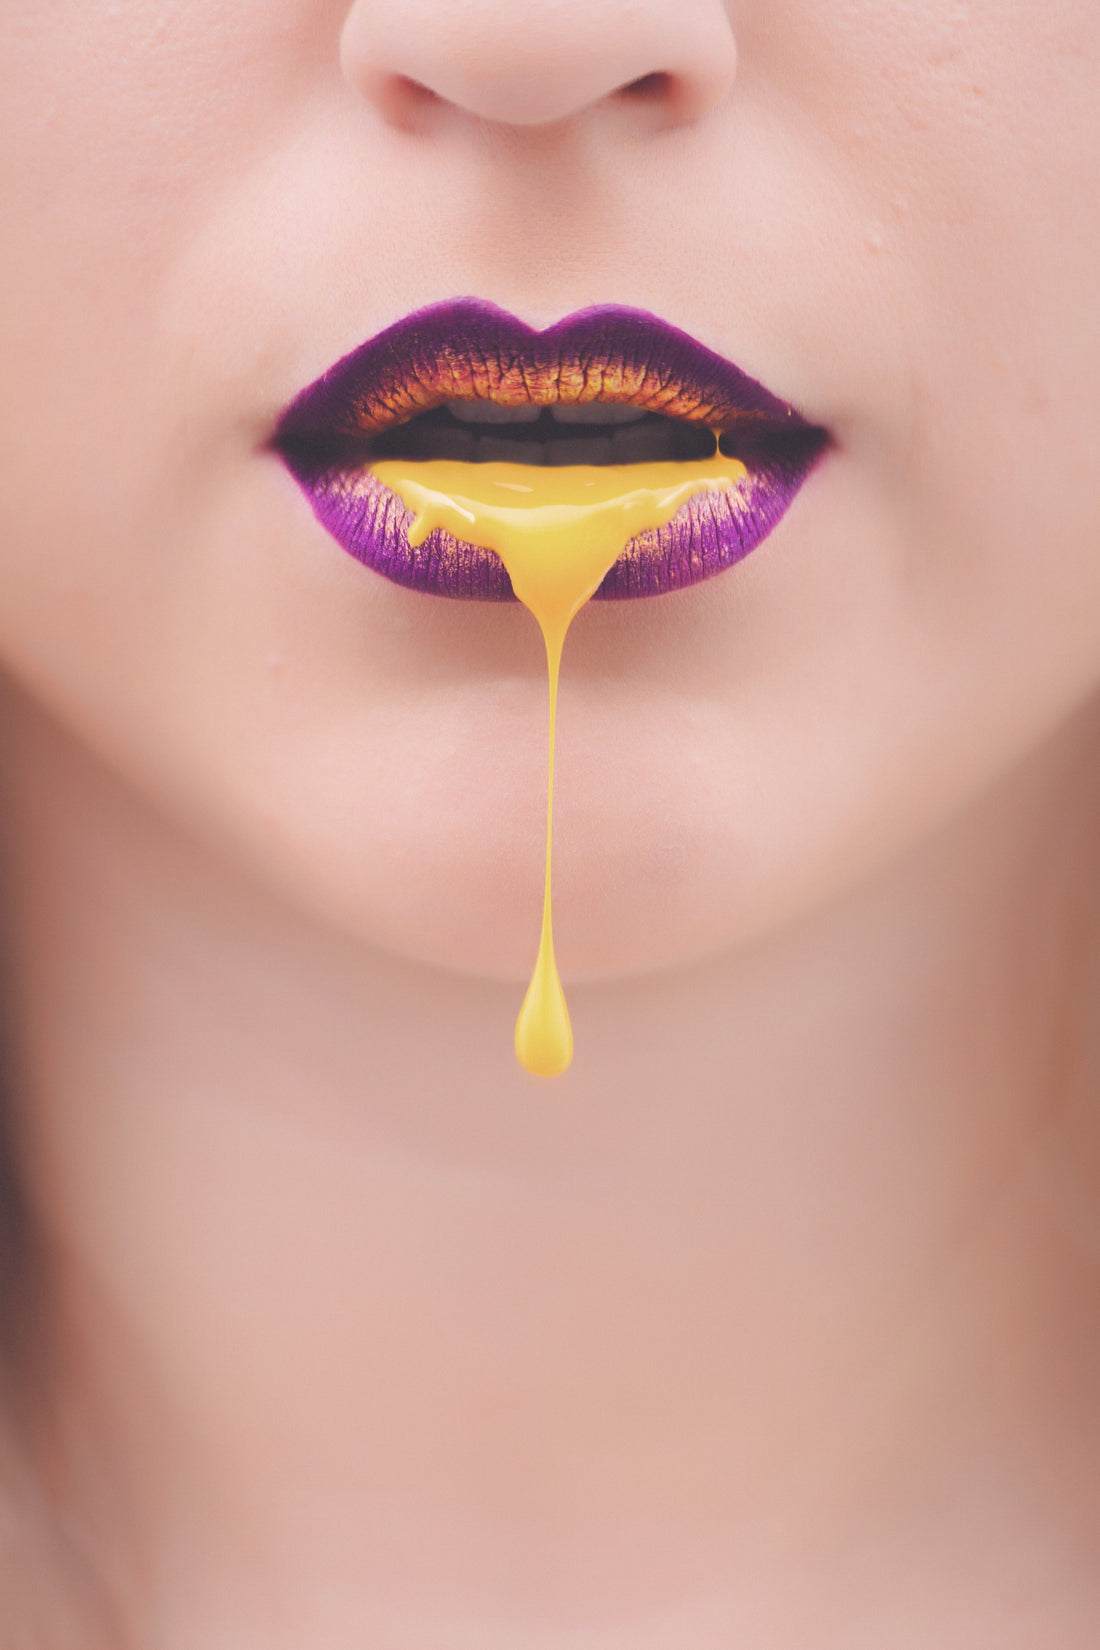 Woman with purple lips dripping yellow liquid, for AutoBrush